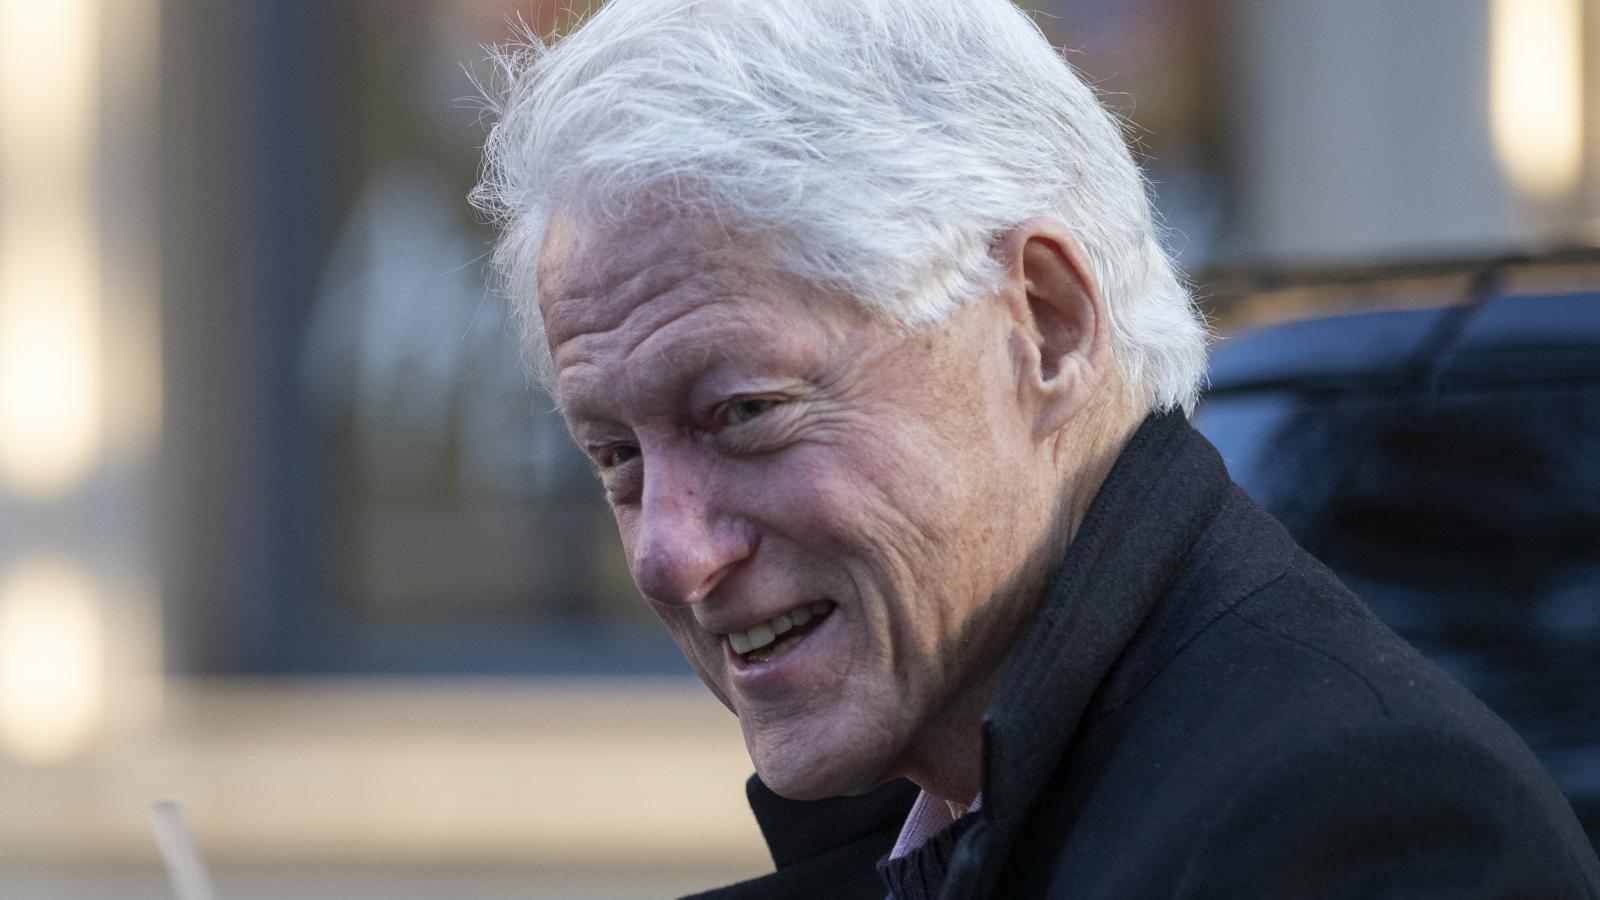 As Democrats attack Barr, Bill Clinton owns up to his ‘worst mistake